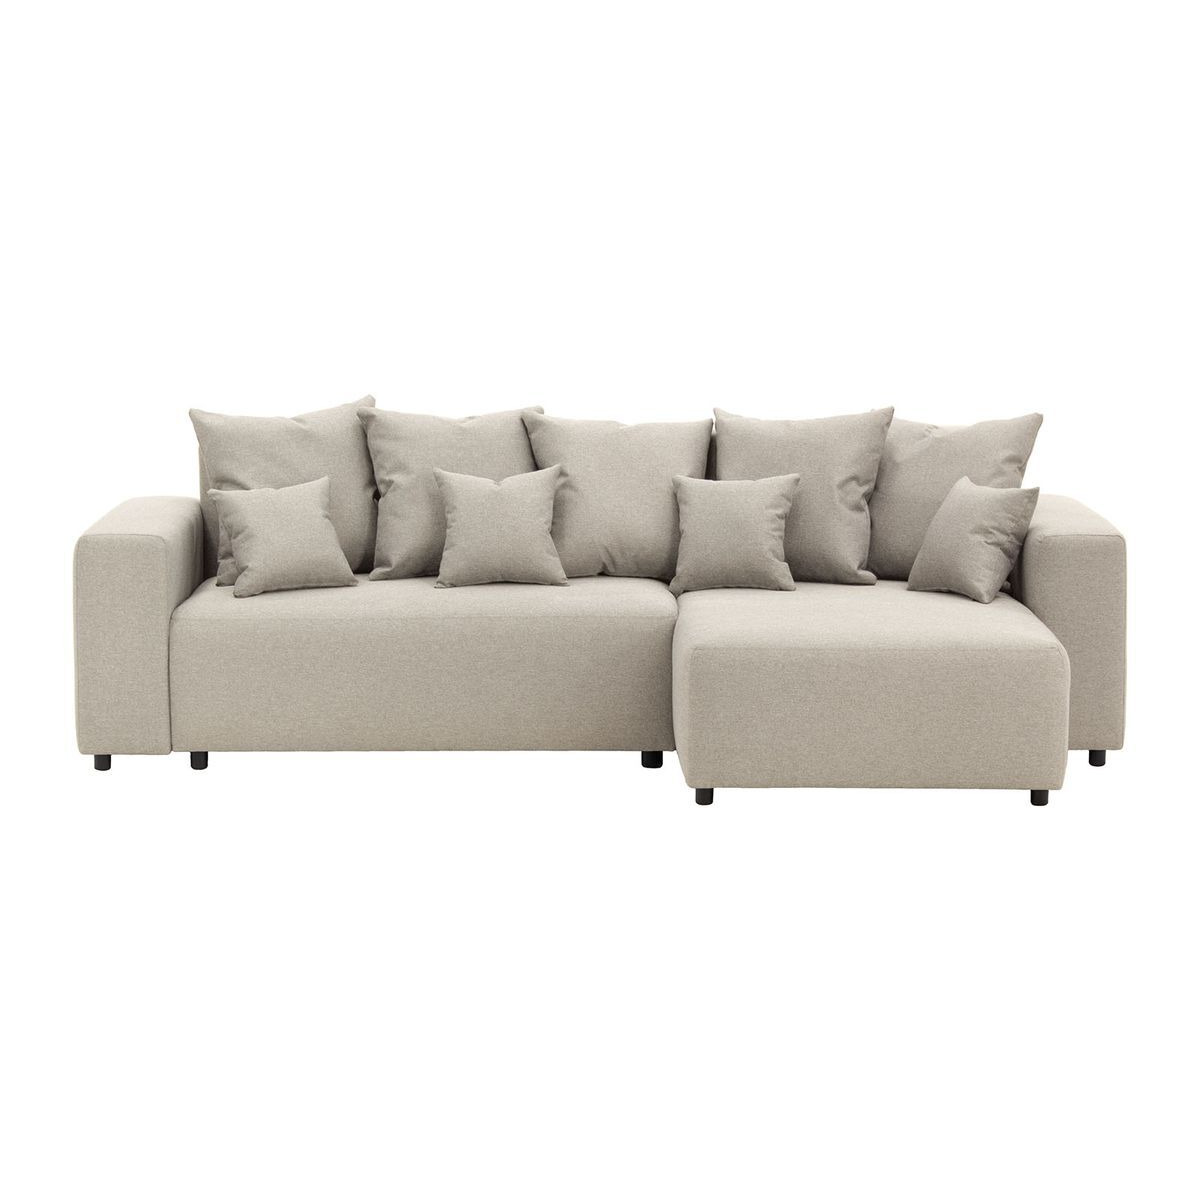 Homely Right Hand Corner Sofa Bed, grey - image 1